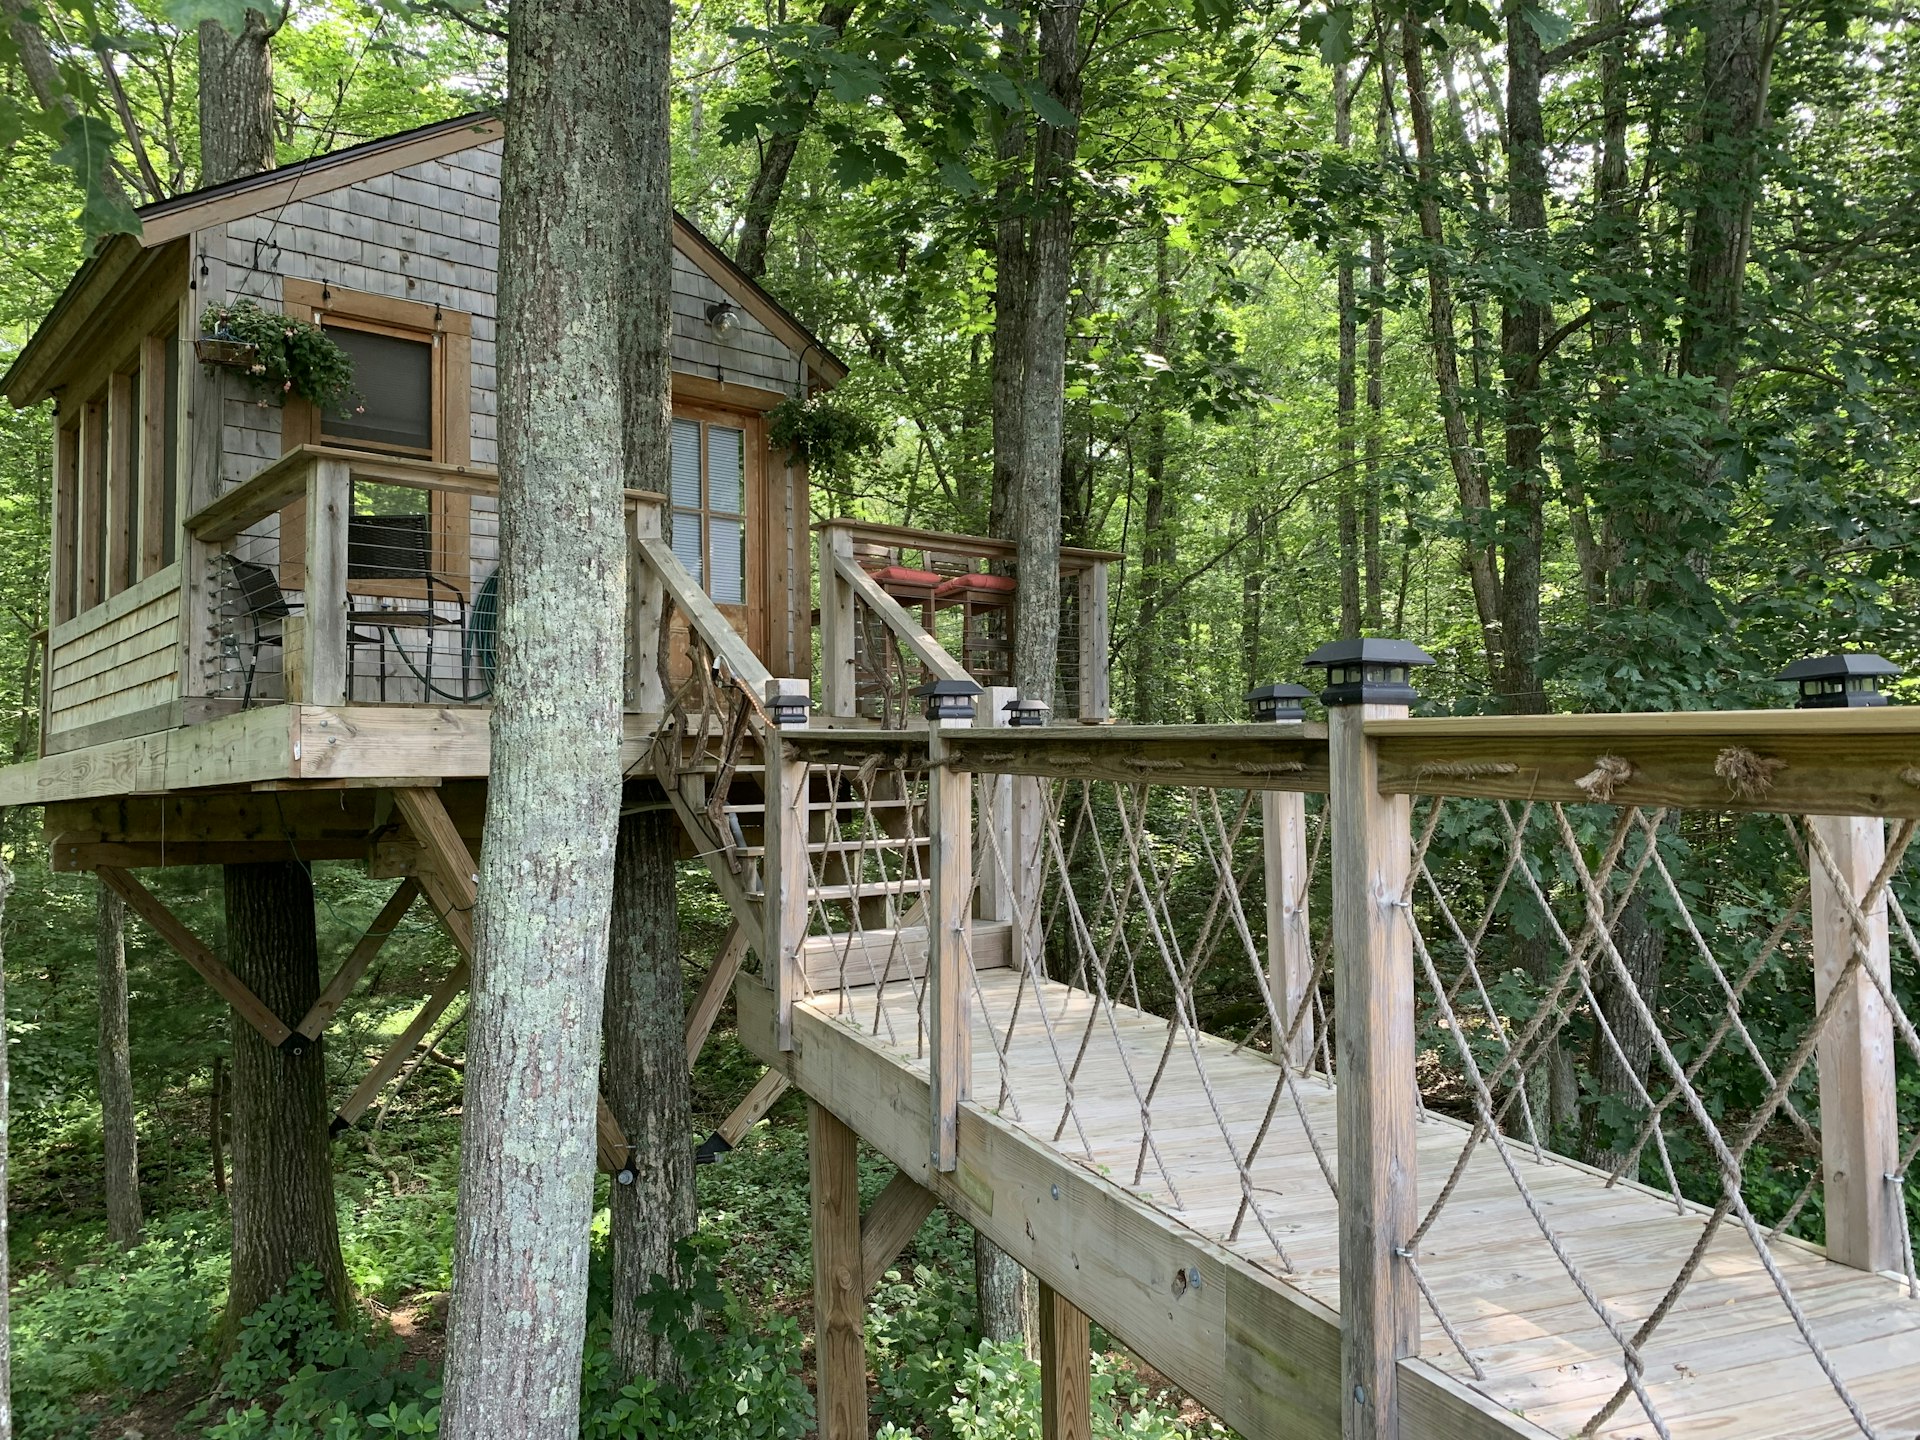 A wooden walkway leads to the entrance of a tree house in Richmond, Rhode Island